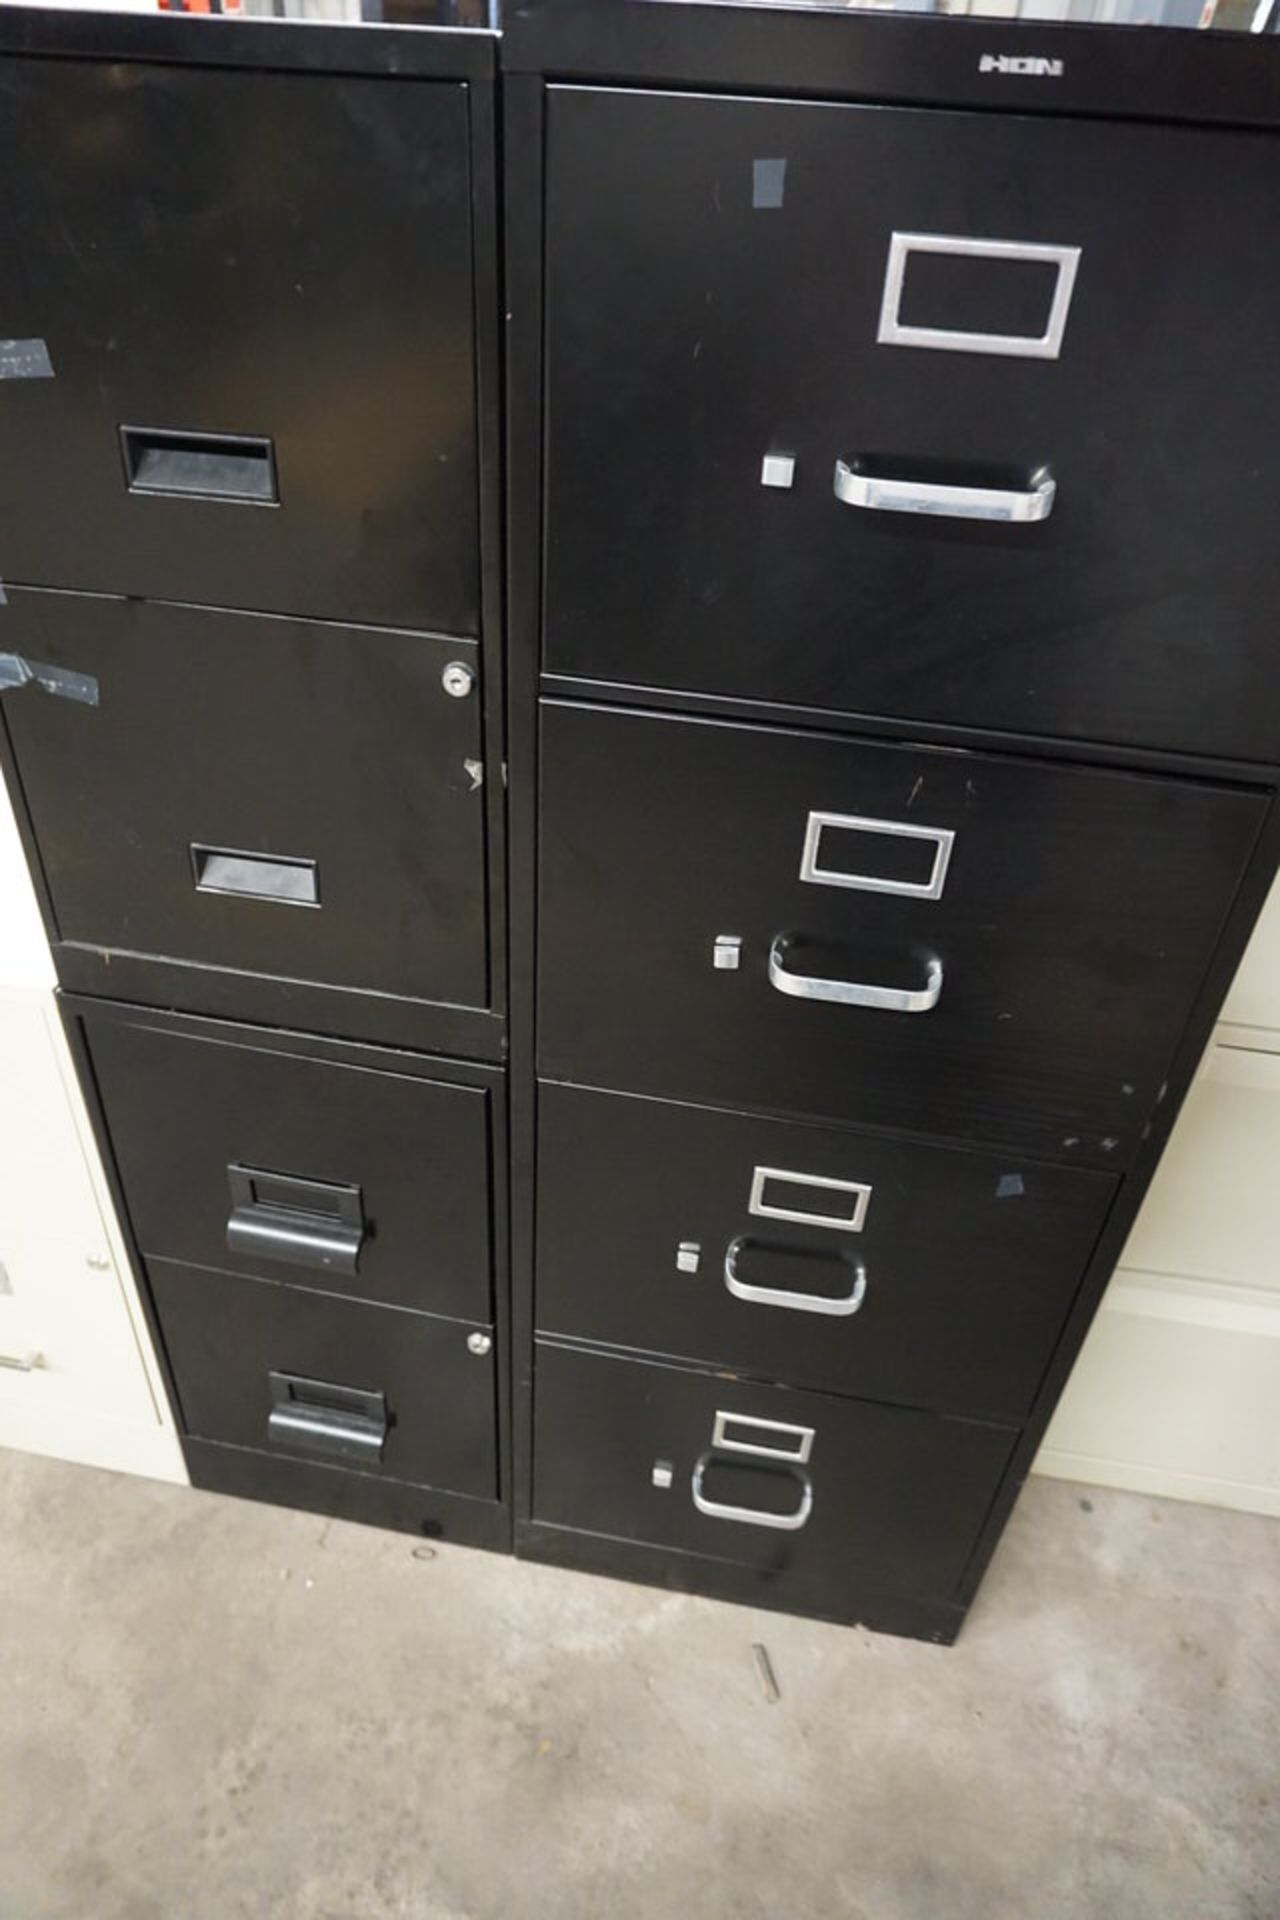 FILE CABINETS: (1) 5 DRAWER LATERAL, (1) 4 DRAWER, (3) 2 DRAWER VERTICALS - Image 3 of 4